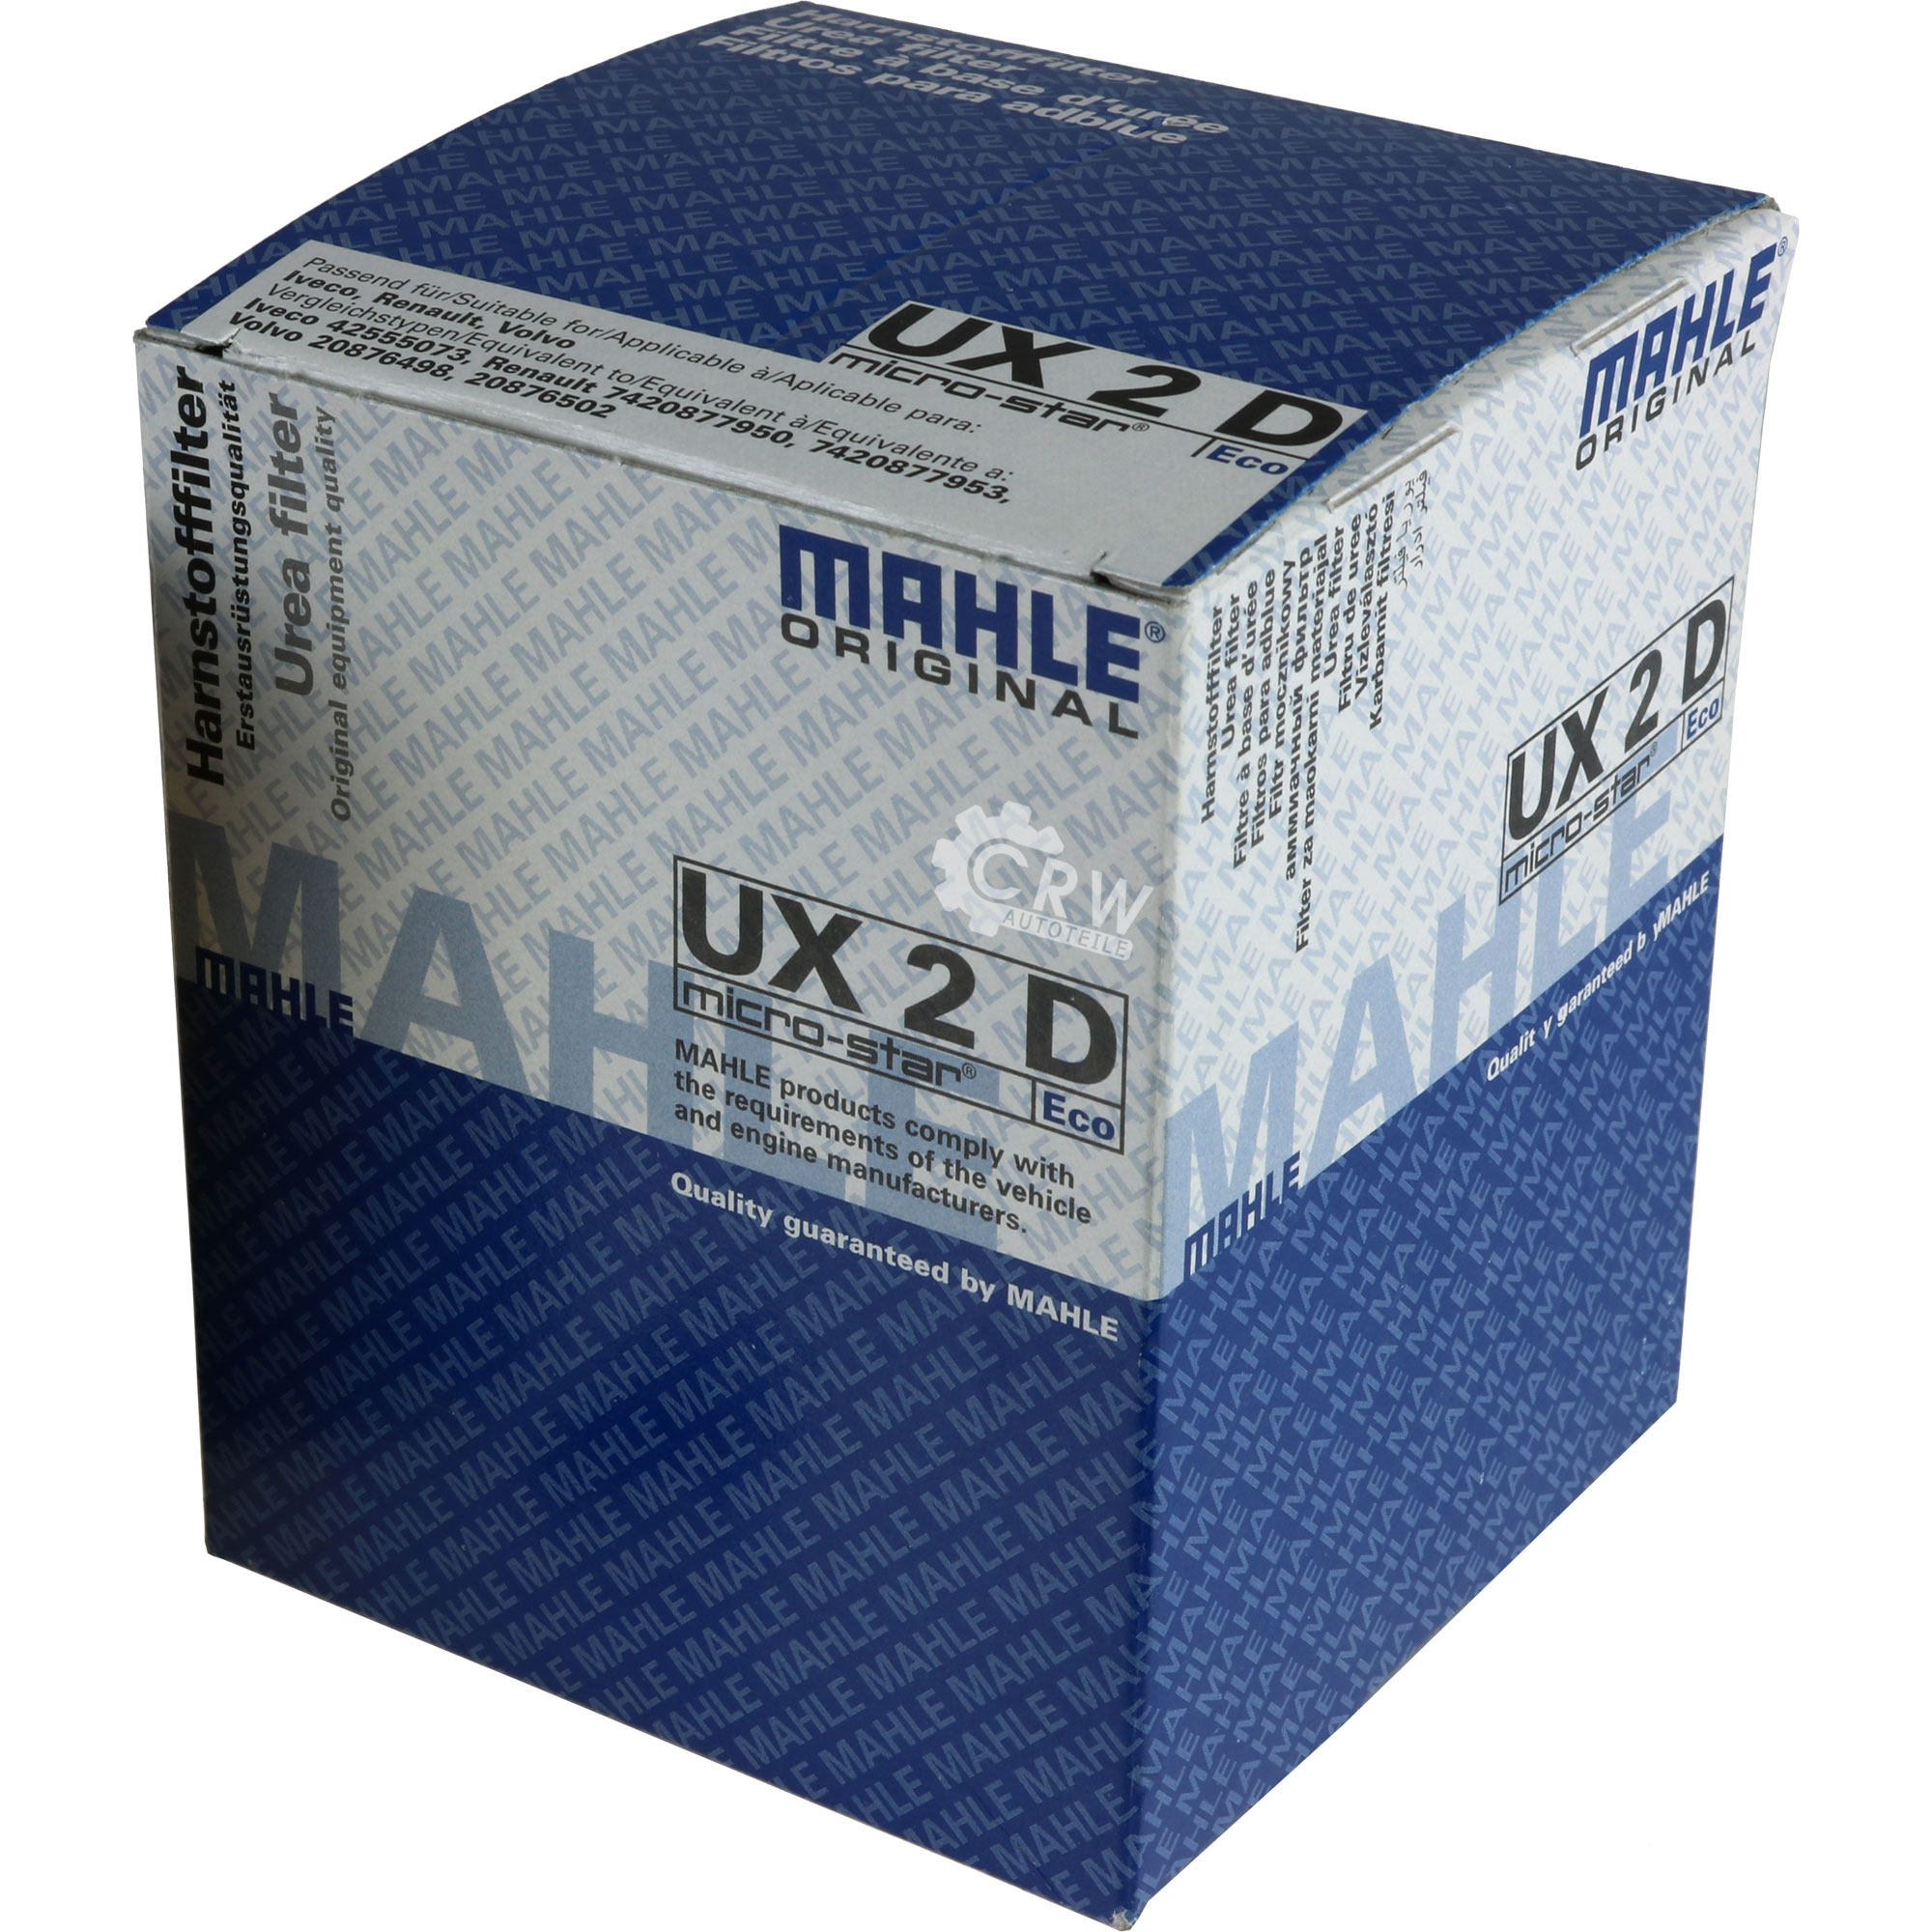 MAHLE Harnstofffilter UX 2D